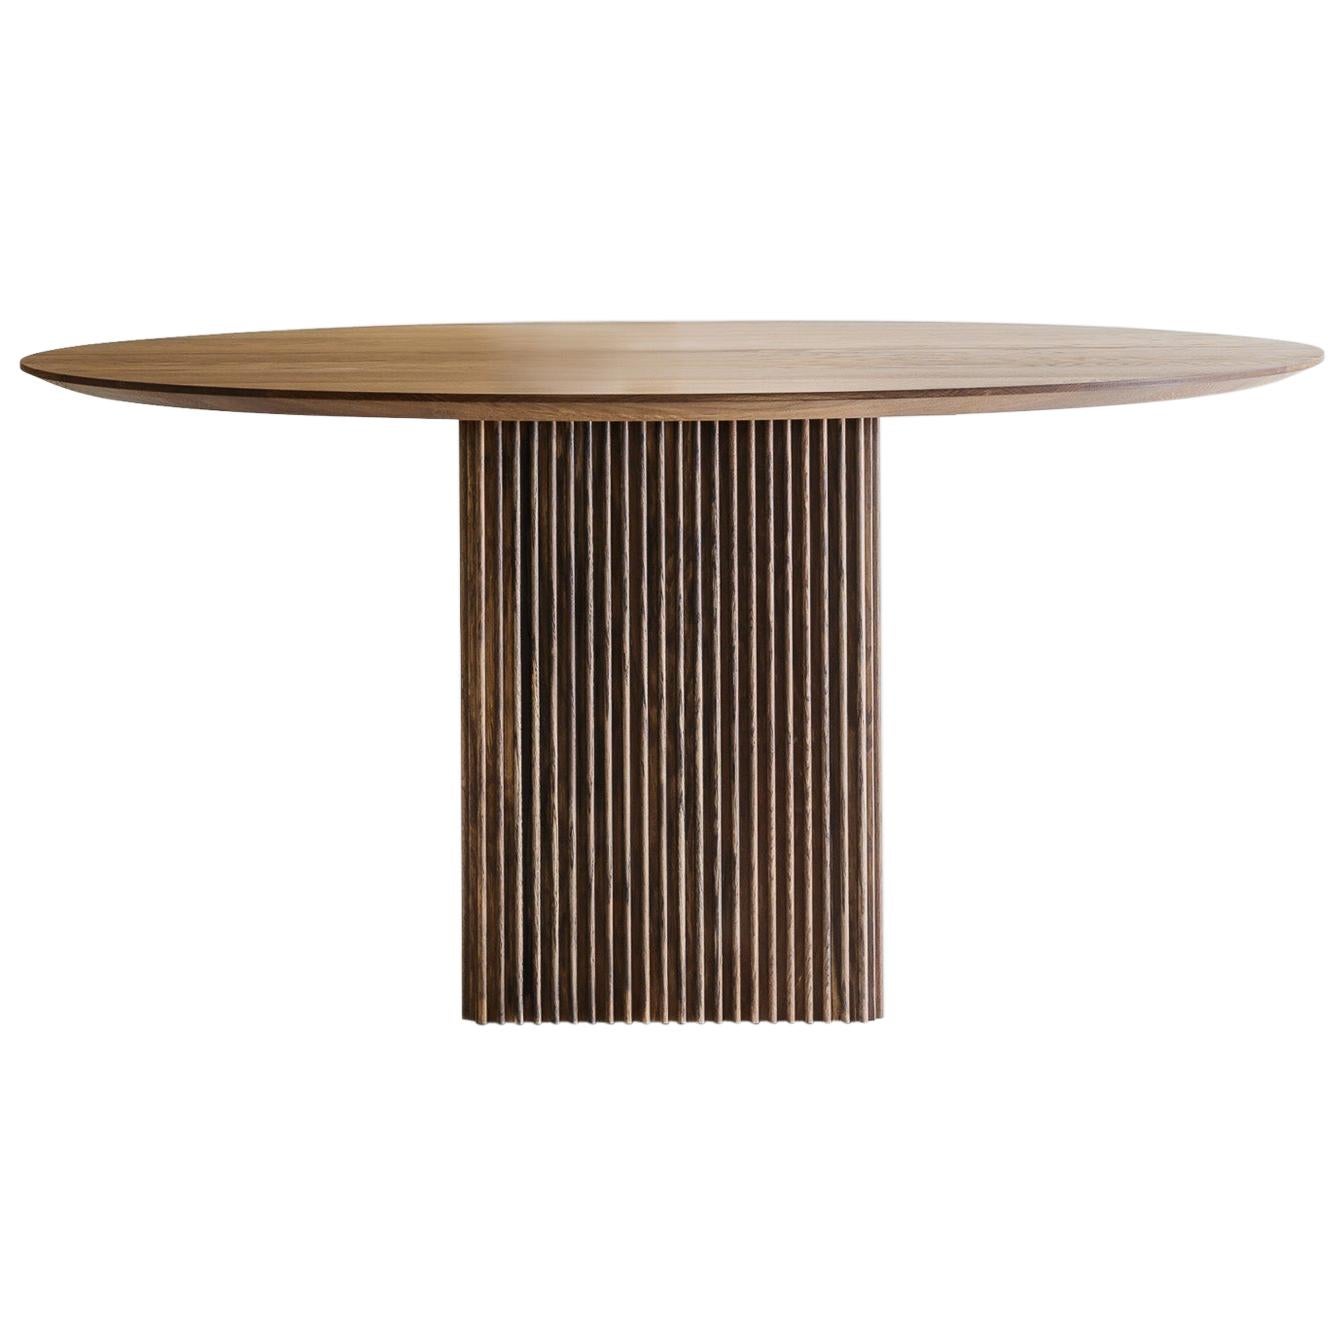 Customizable Round Dining Table Ten, More Sizes, More Wood Finishes